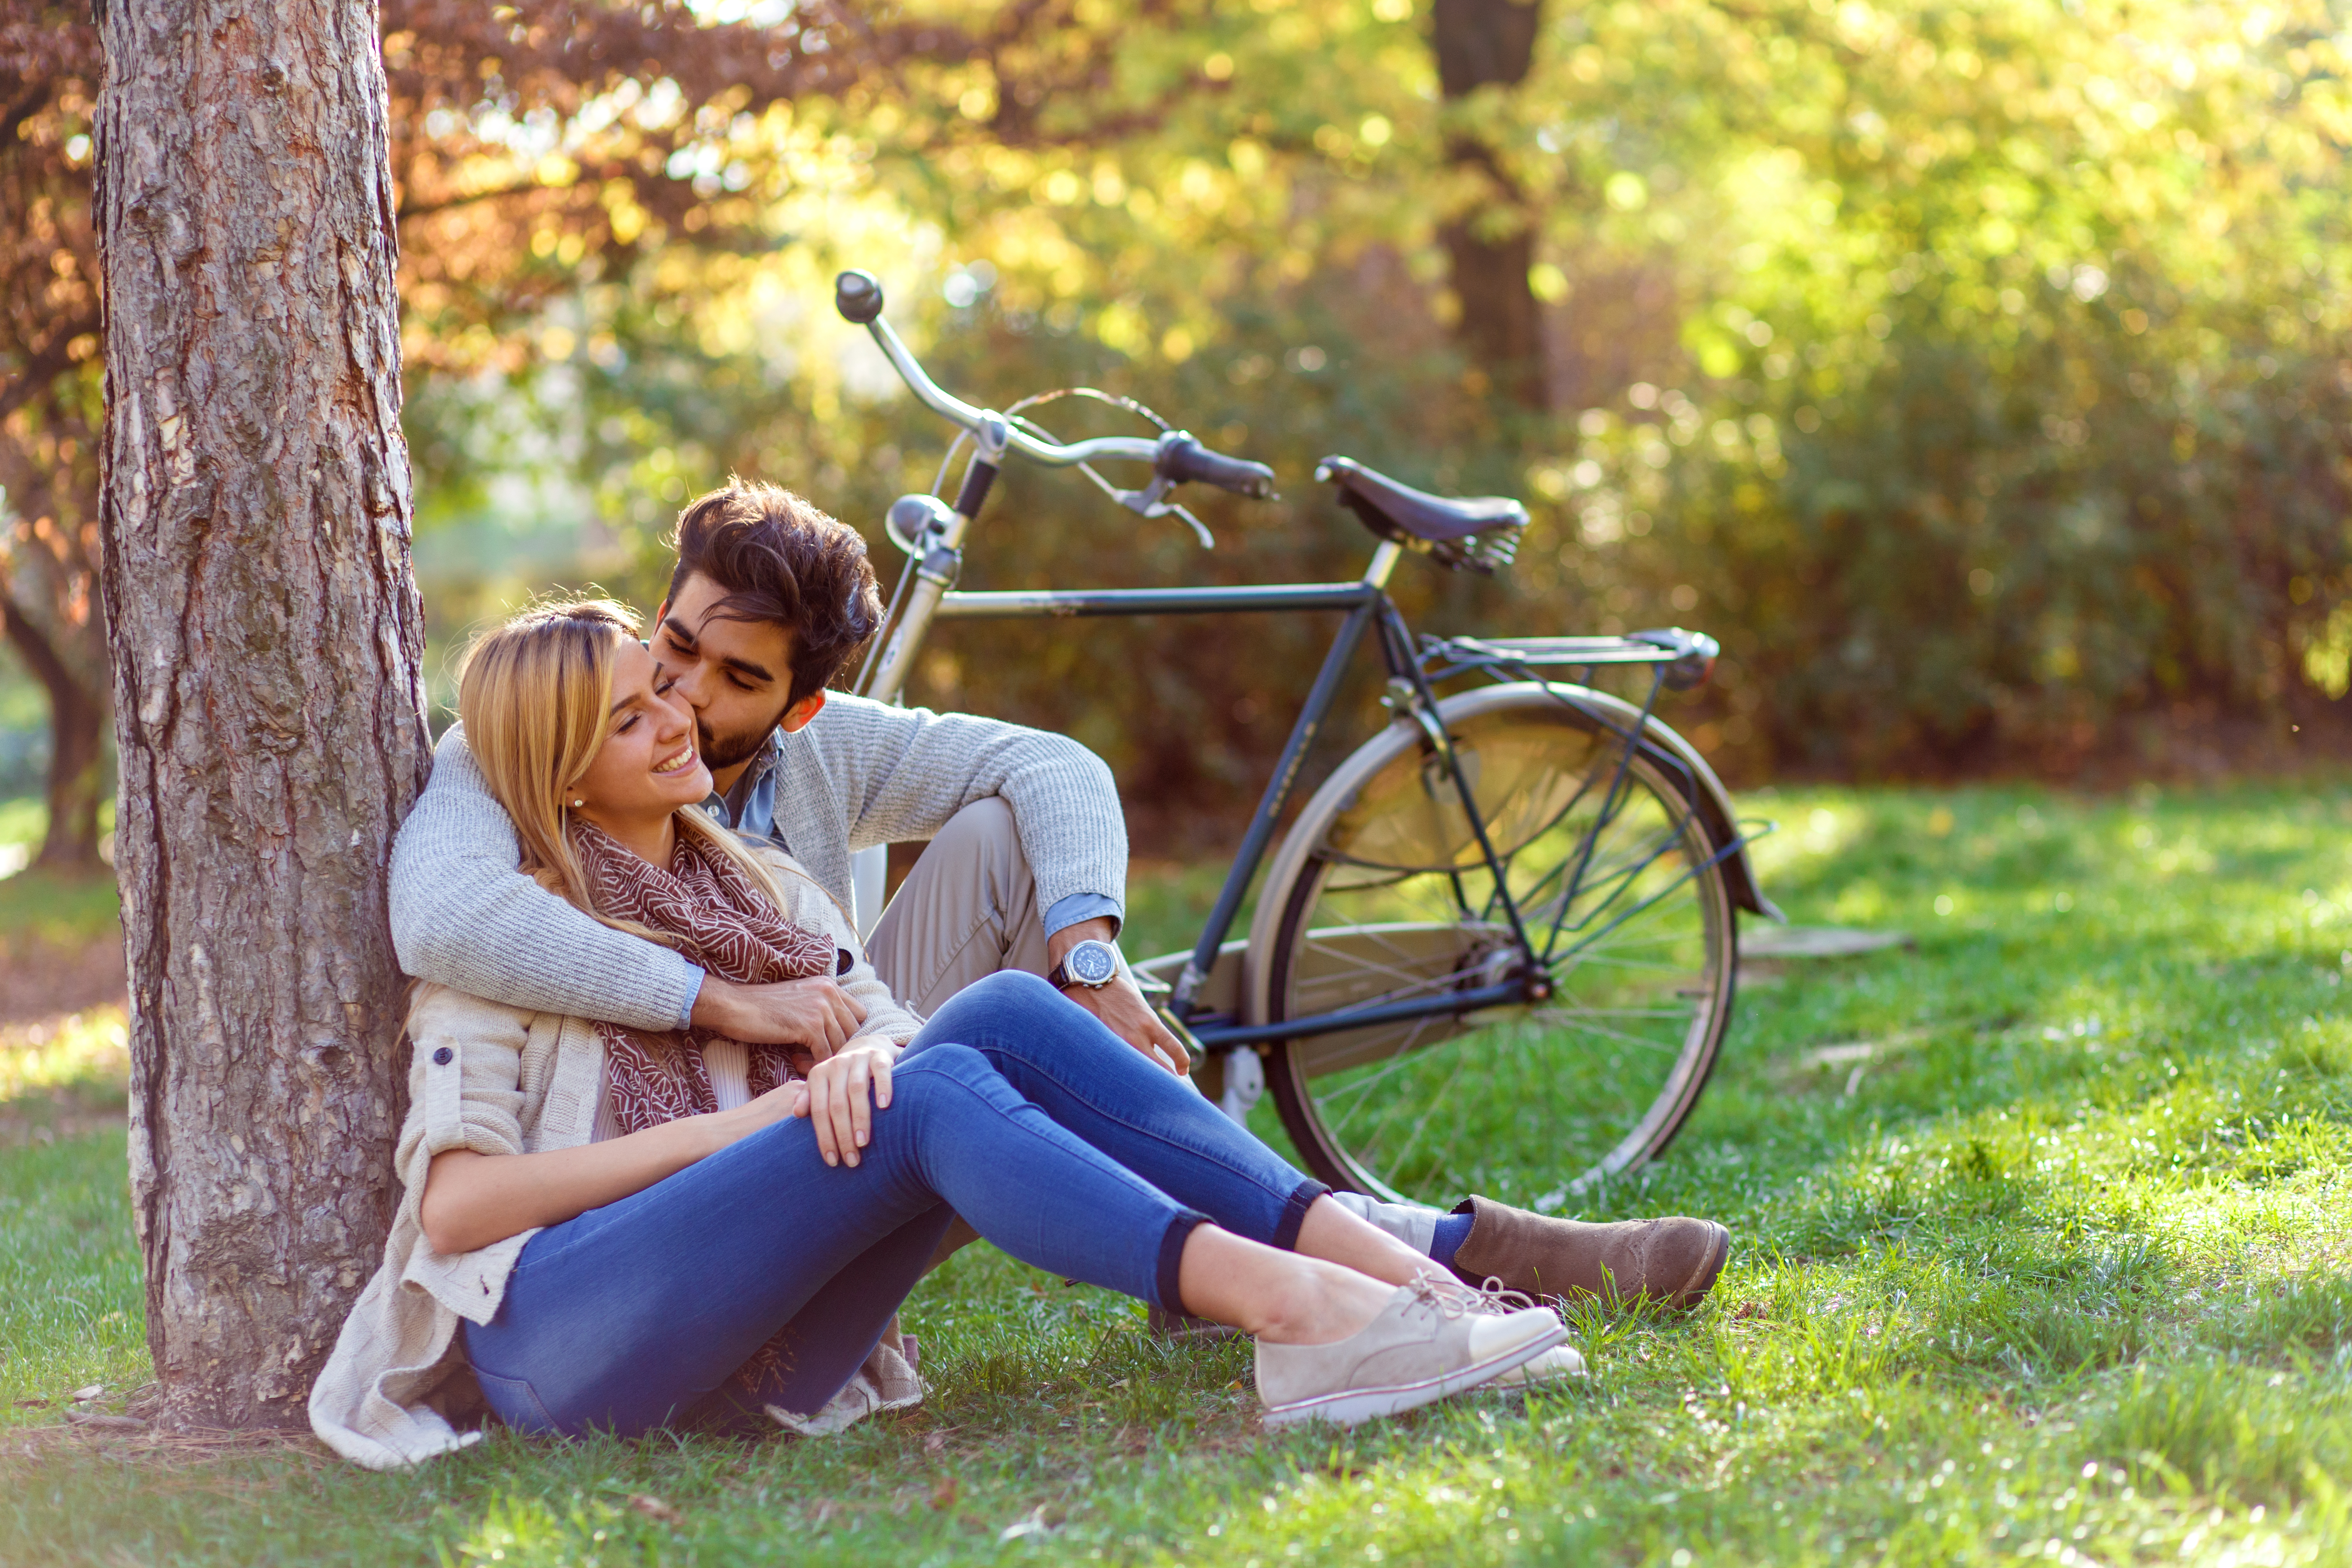 A couple having a wonderful time in a park | Source: Shutterstock